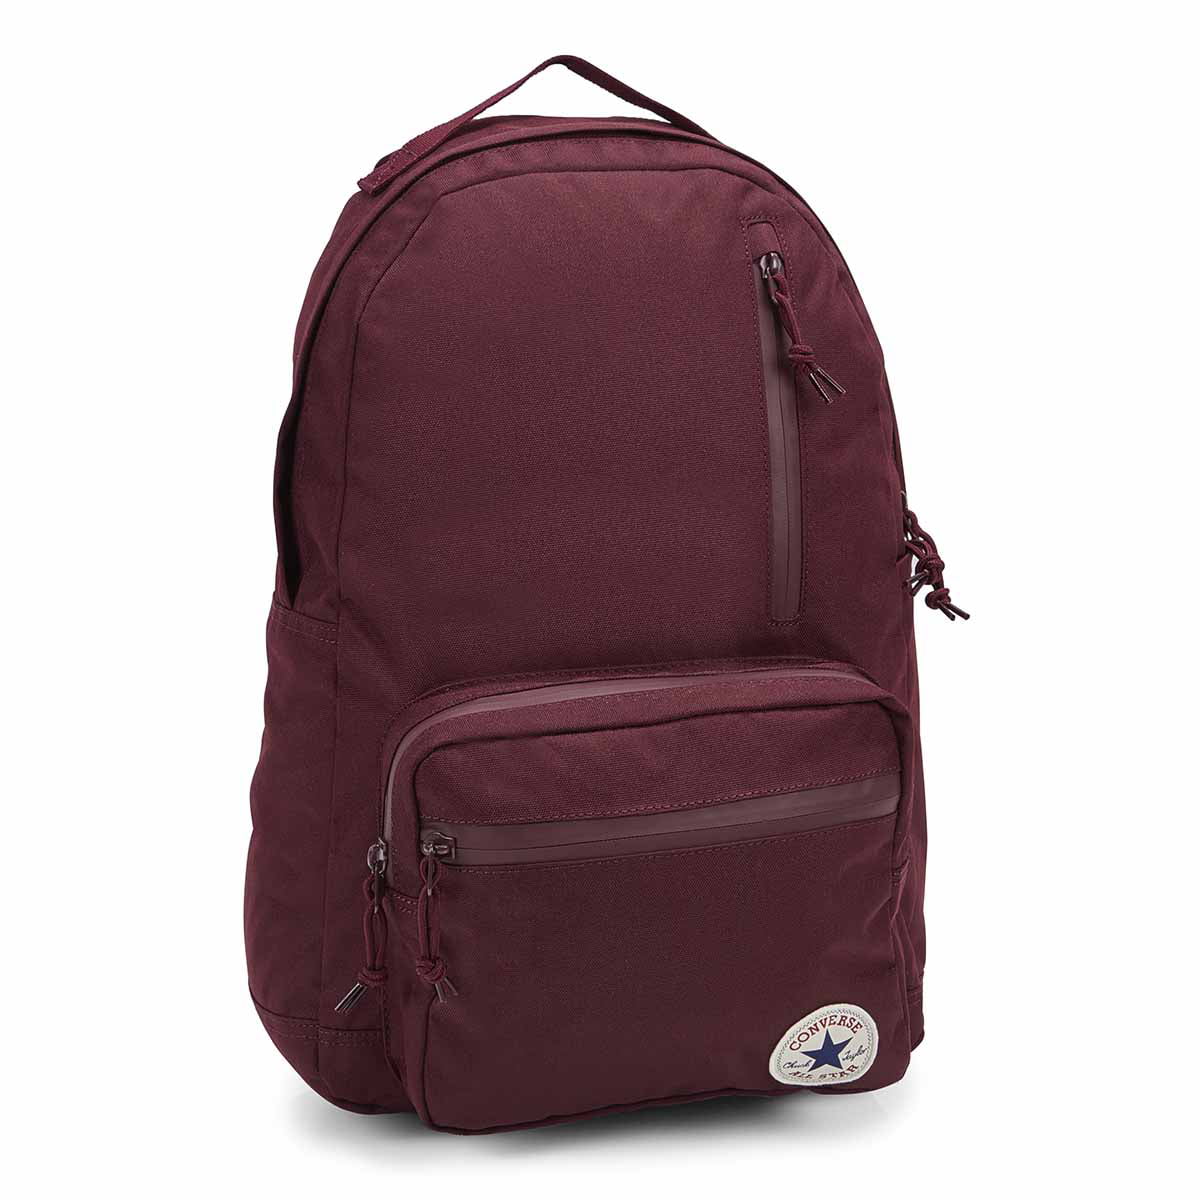 converse one star backpack